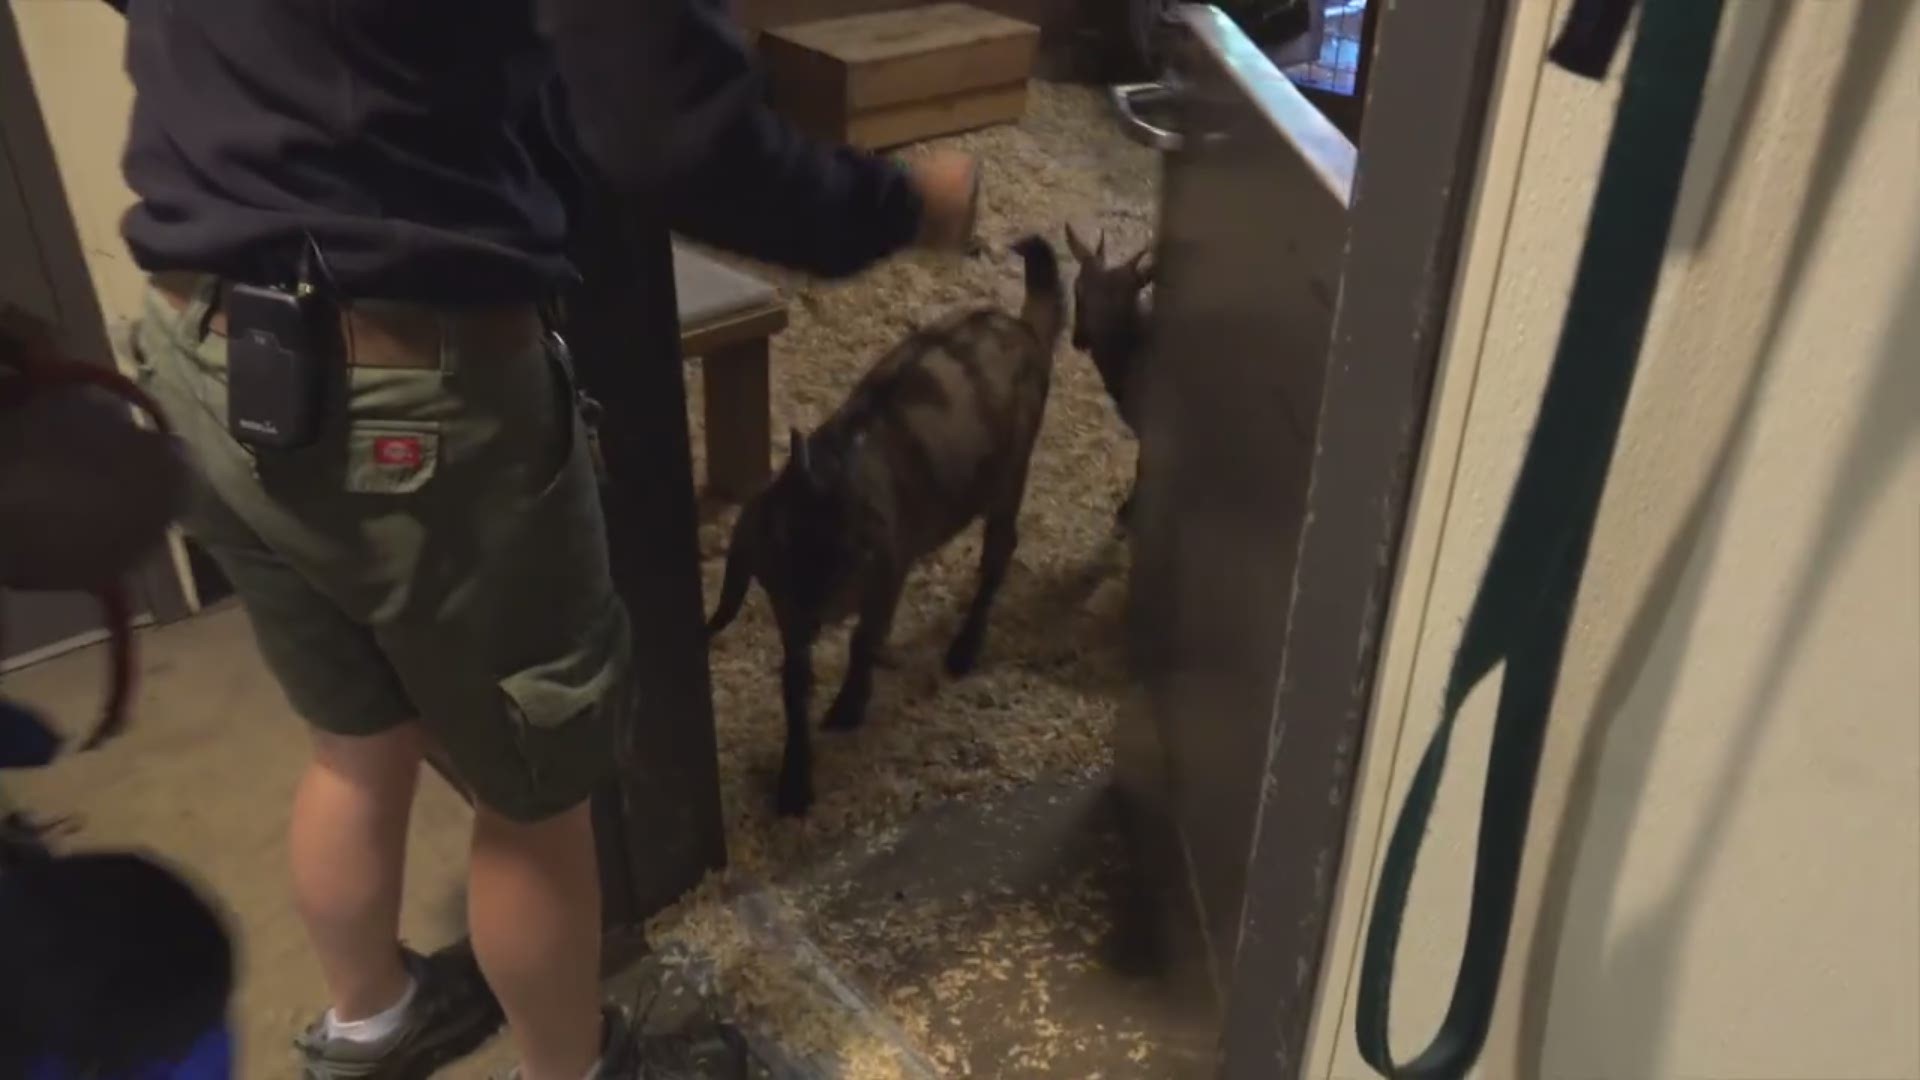 The Oregon Zoo's tiny goats visited the river otters.